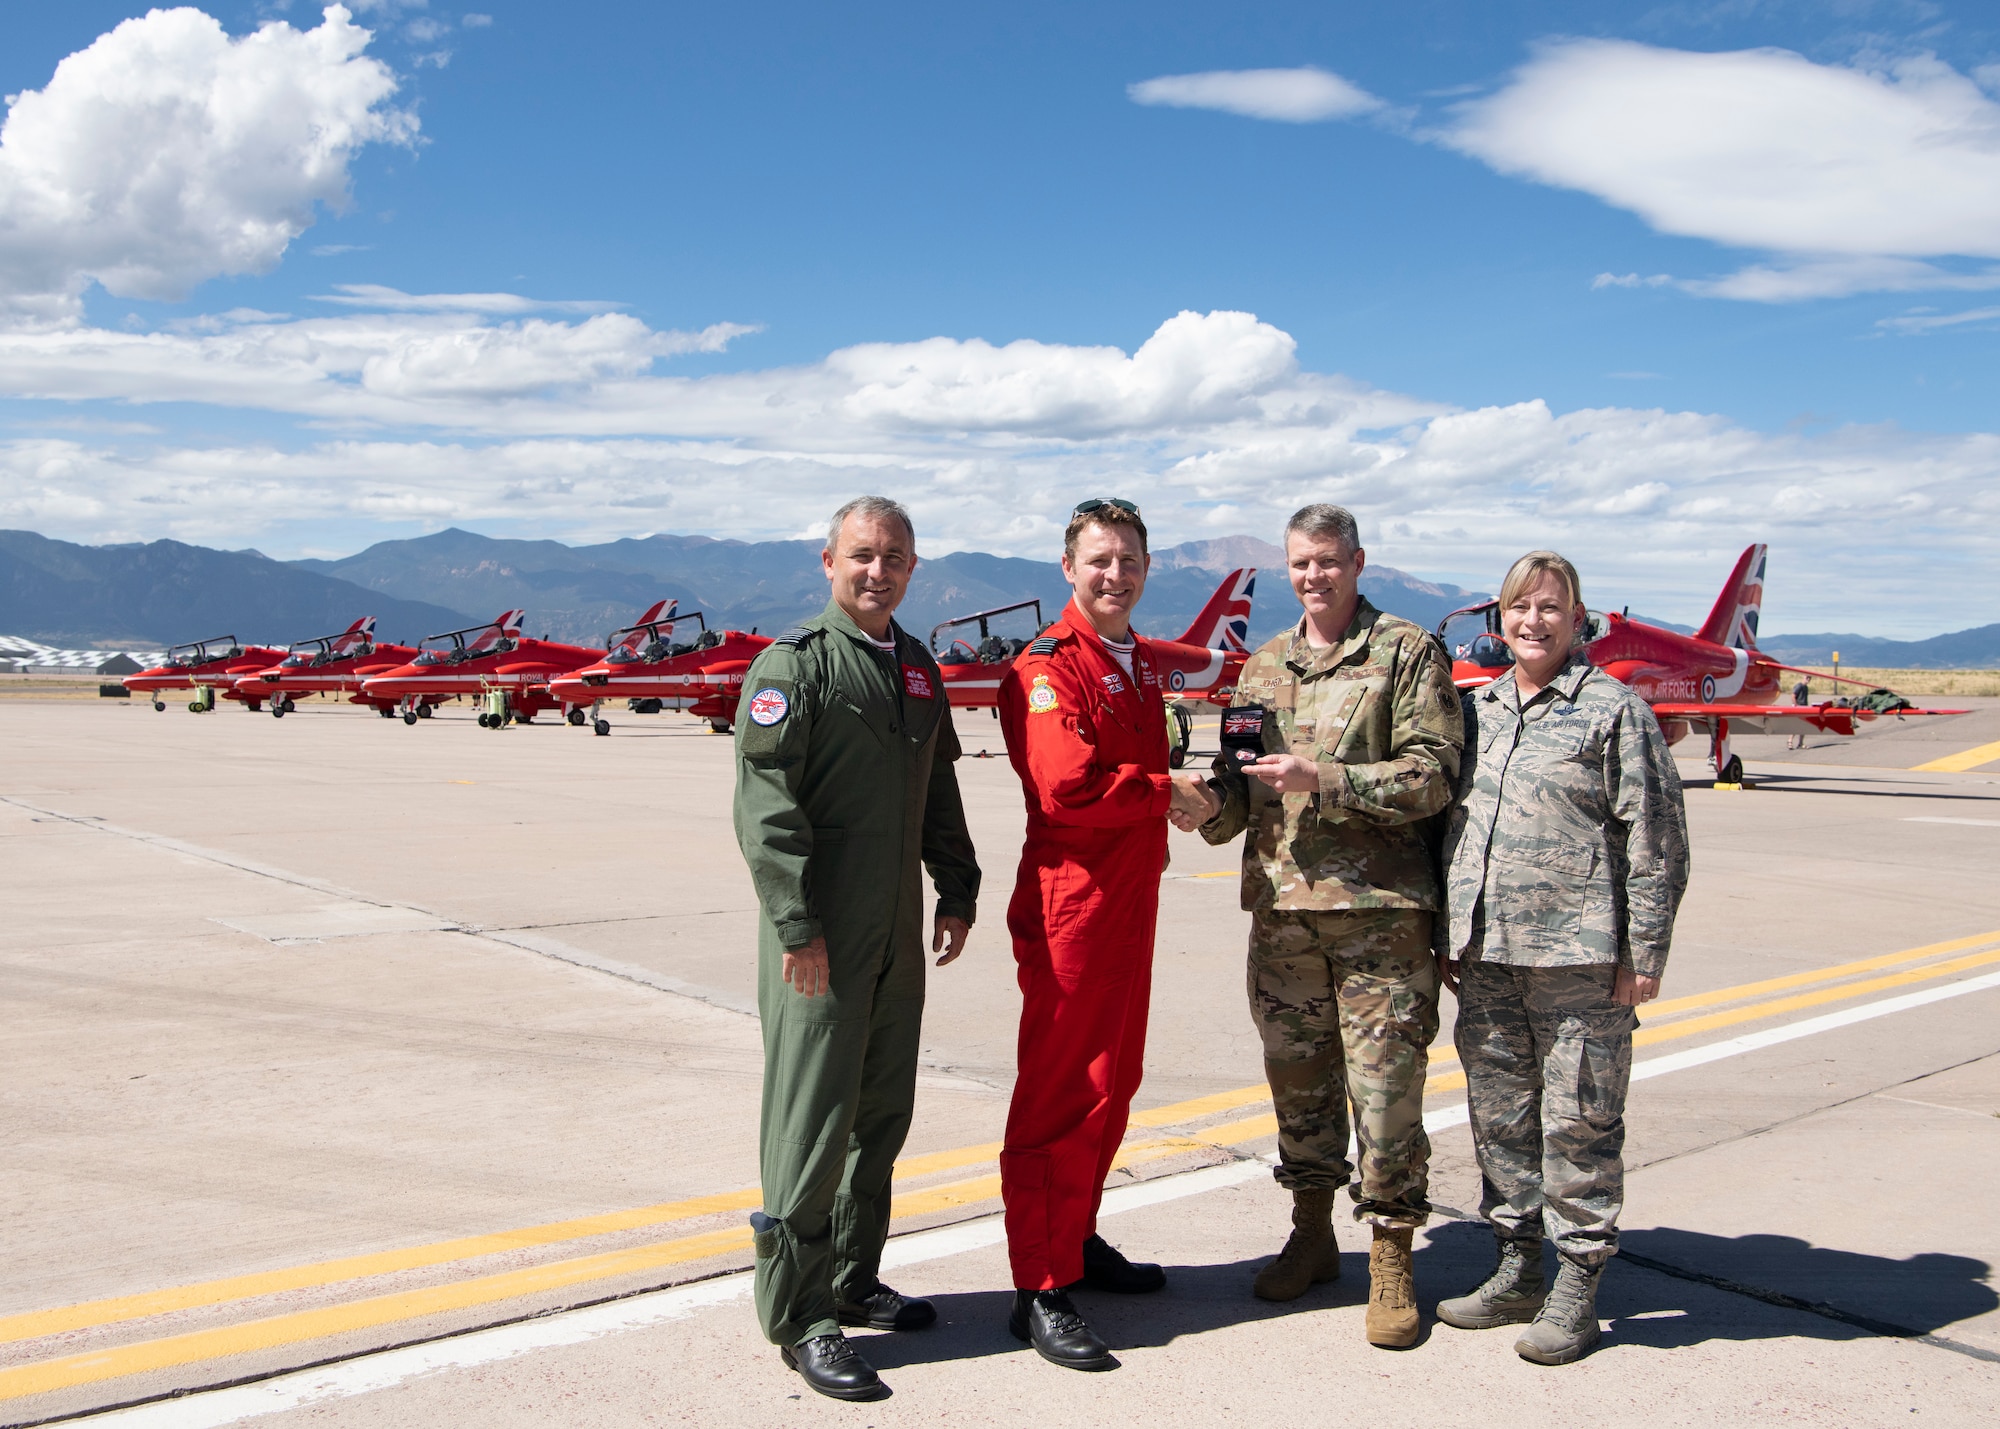 From left, Group Captain Tony Franklin and Wing Commander Andrew Keith, Royal Air Force, present a Red Arrows coin to Col. Sam Johnson, 21st Space Wing vice commander and Col. Jennifer Fitch, individual mobilization augmentee to the 21st Space Wing commander Sept. 16, 2019 at Peterson Air Force Base, Colorado. Keith and Franklin were visiting with the Red Arrows, the Royal Air Force aerial demonstration team during the team’s North American tour. (U.S. Air Force photo by Heather Heiney)